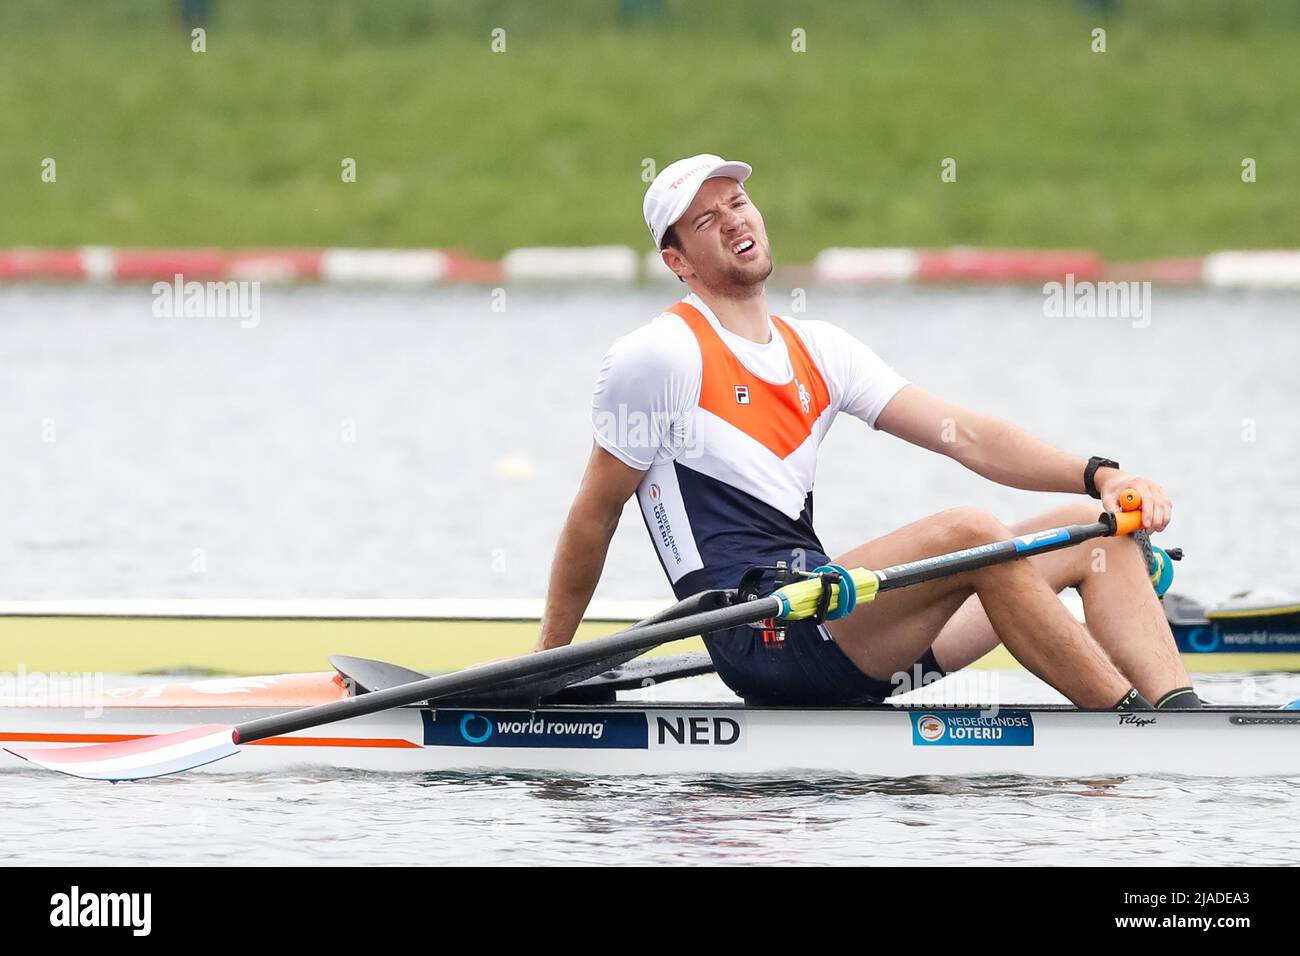 BELGRADE, SERBIA - MAY 29: Melvin Twellaar of the Netherlands competing in the Men's Single Sculls Final FA during the World Rowing Cup at the Sava Lake on May 29, 2022 in Belgrade, Serbia (Photo by Nikola Krstic/Orange Pictures) Stock Photo